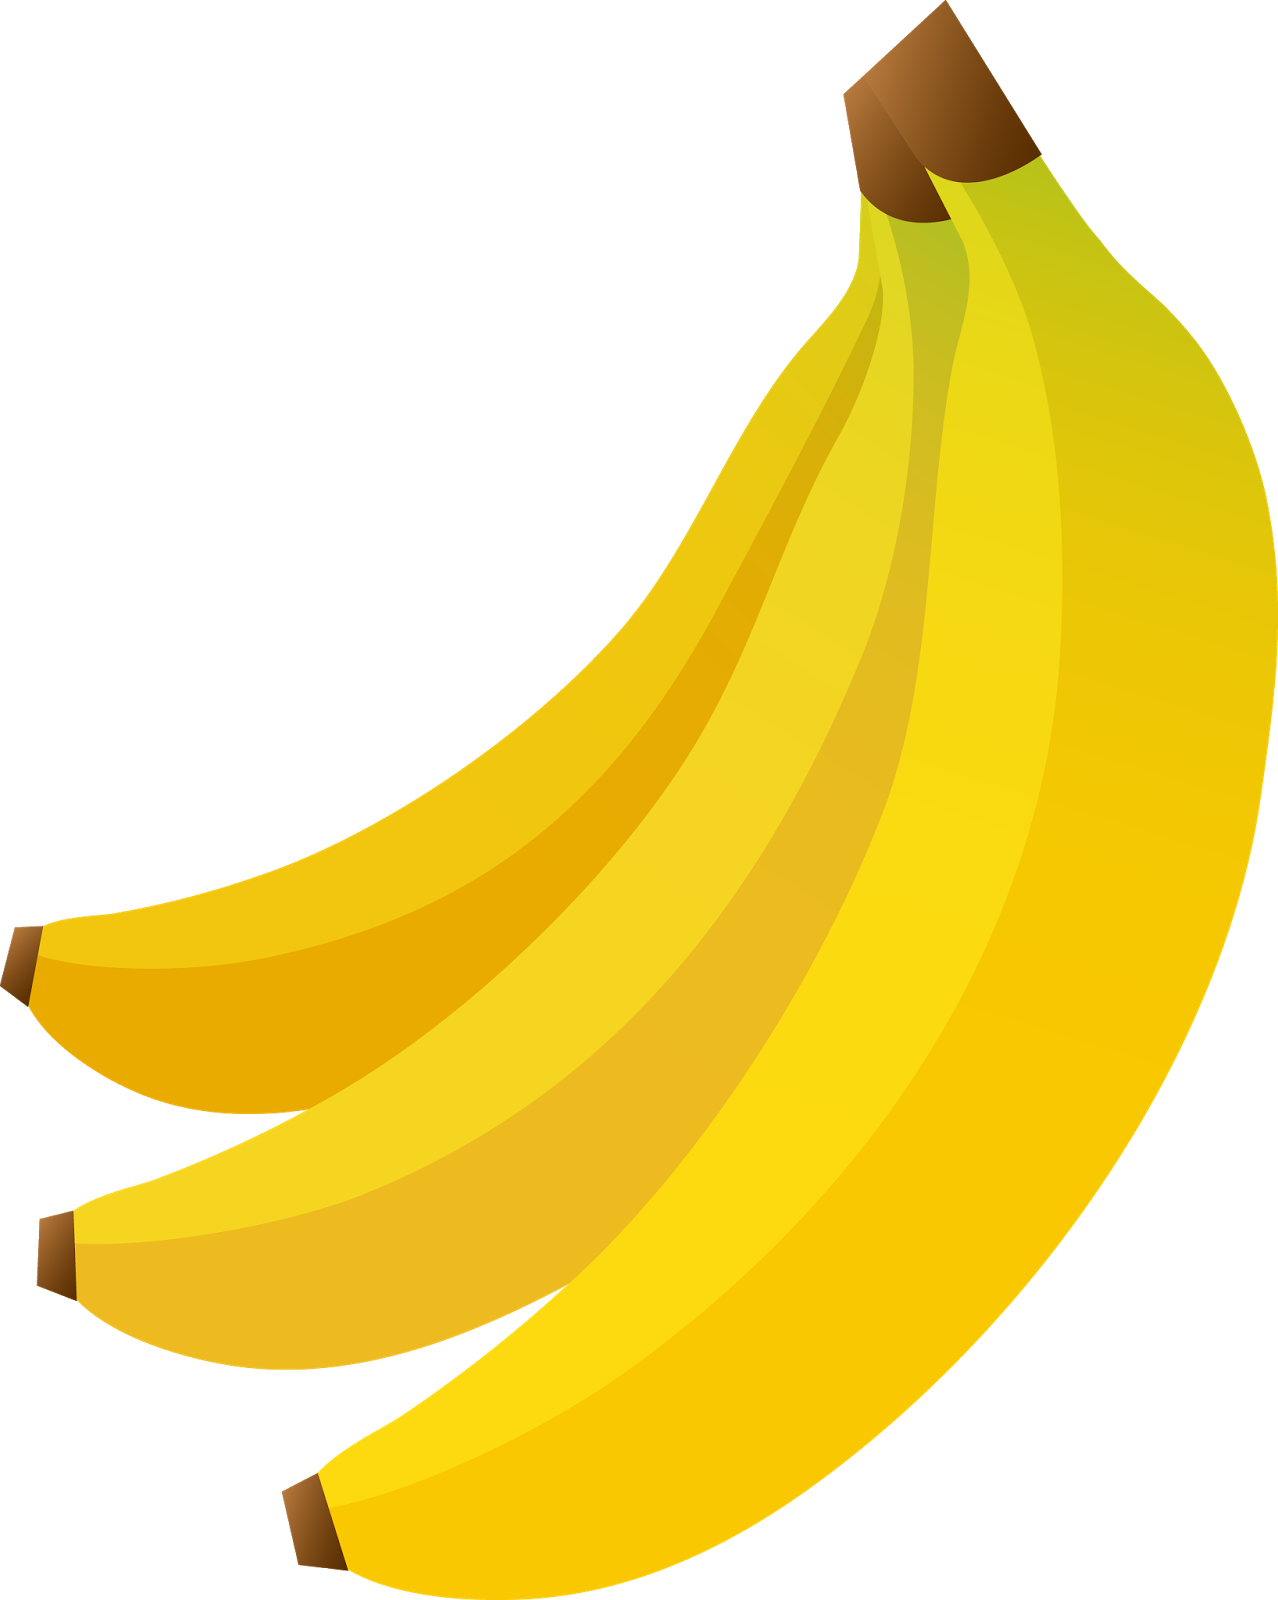 Images of banana bunch. Pancakes clipart fruit